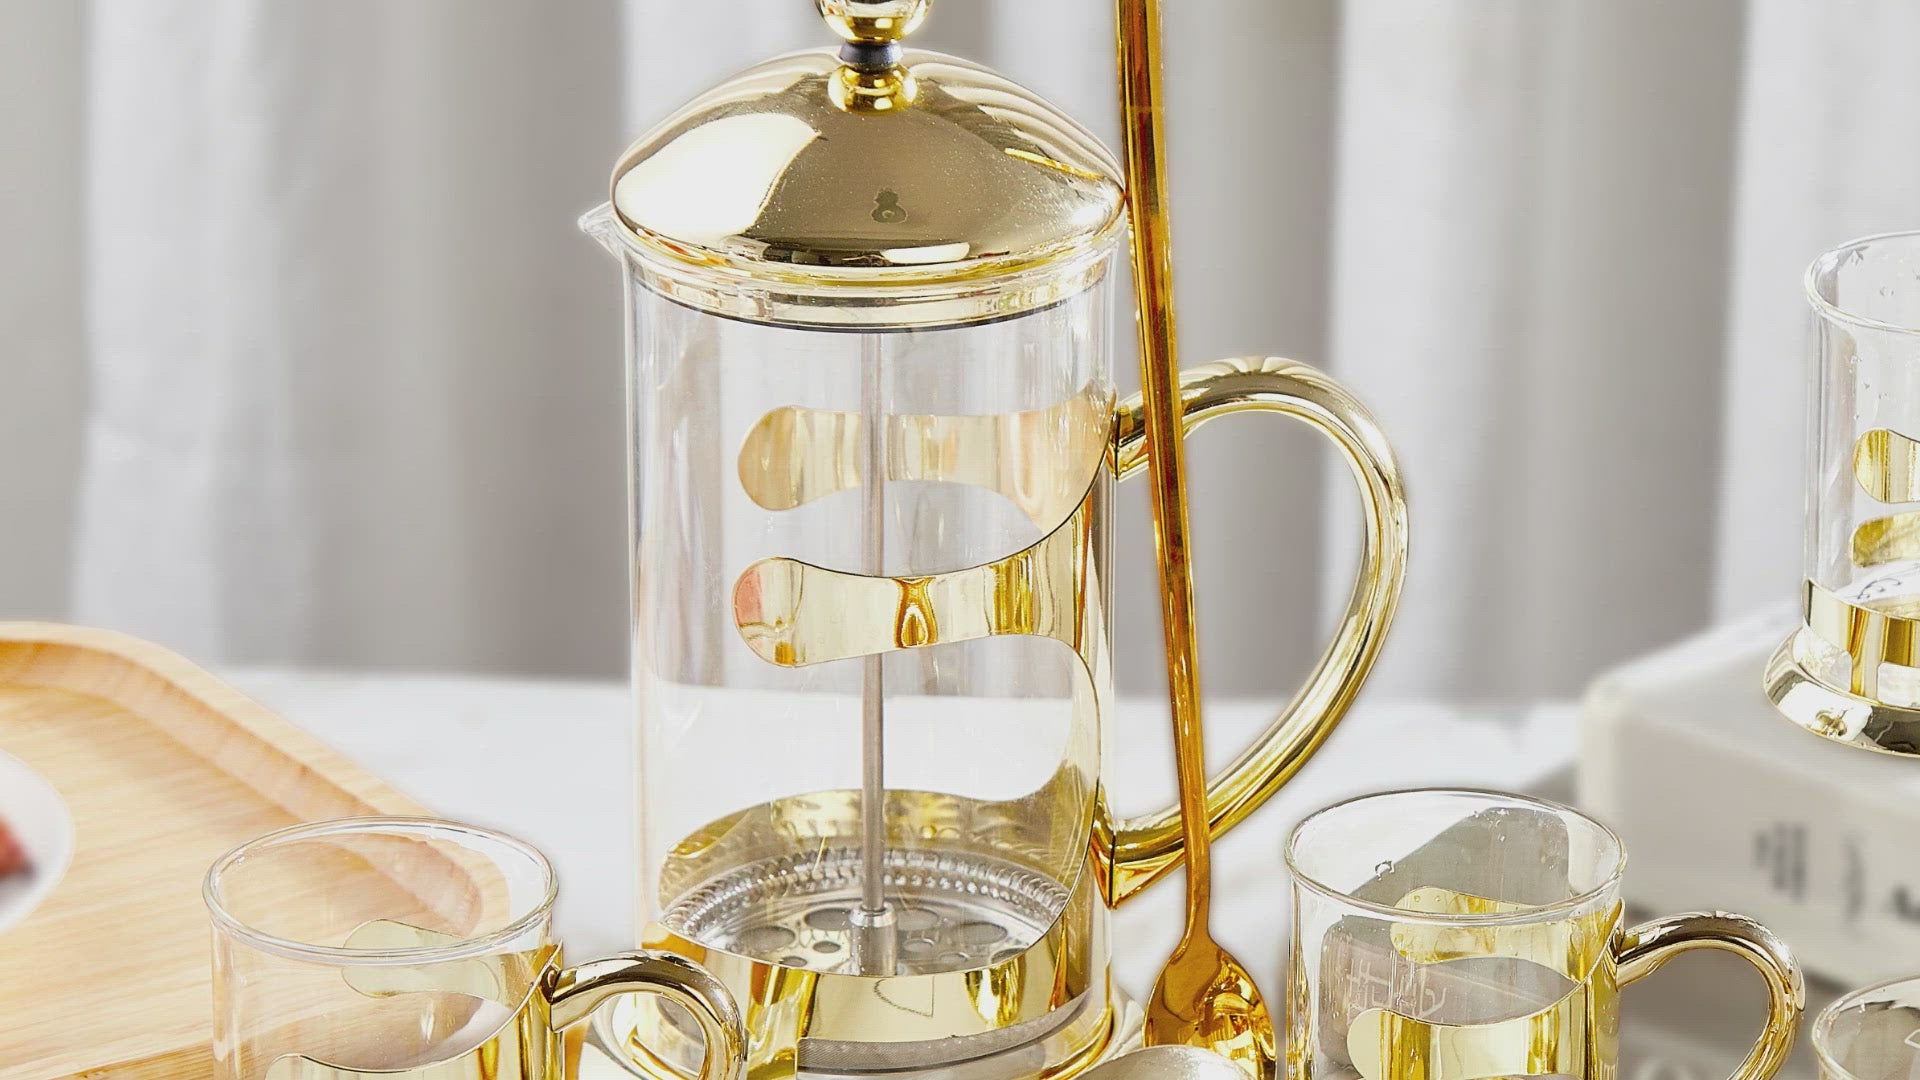 DUJUST Gold French Press Coffee Maker, Luxury Design French Coffee Press with 4-Level Filter System, High-Grade Glass for Hot & Cold Resistance